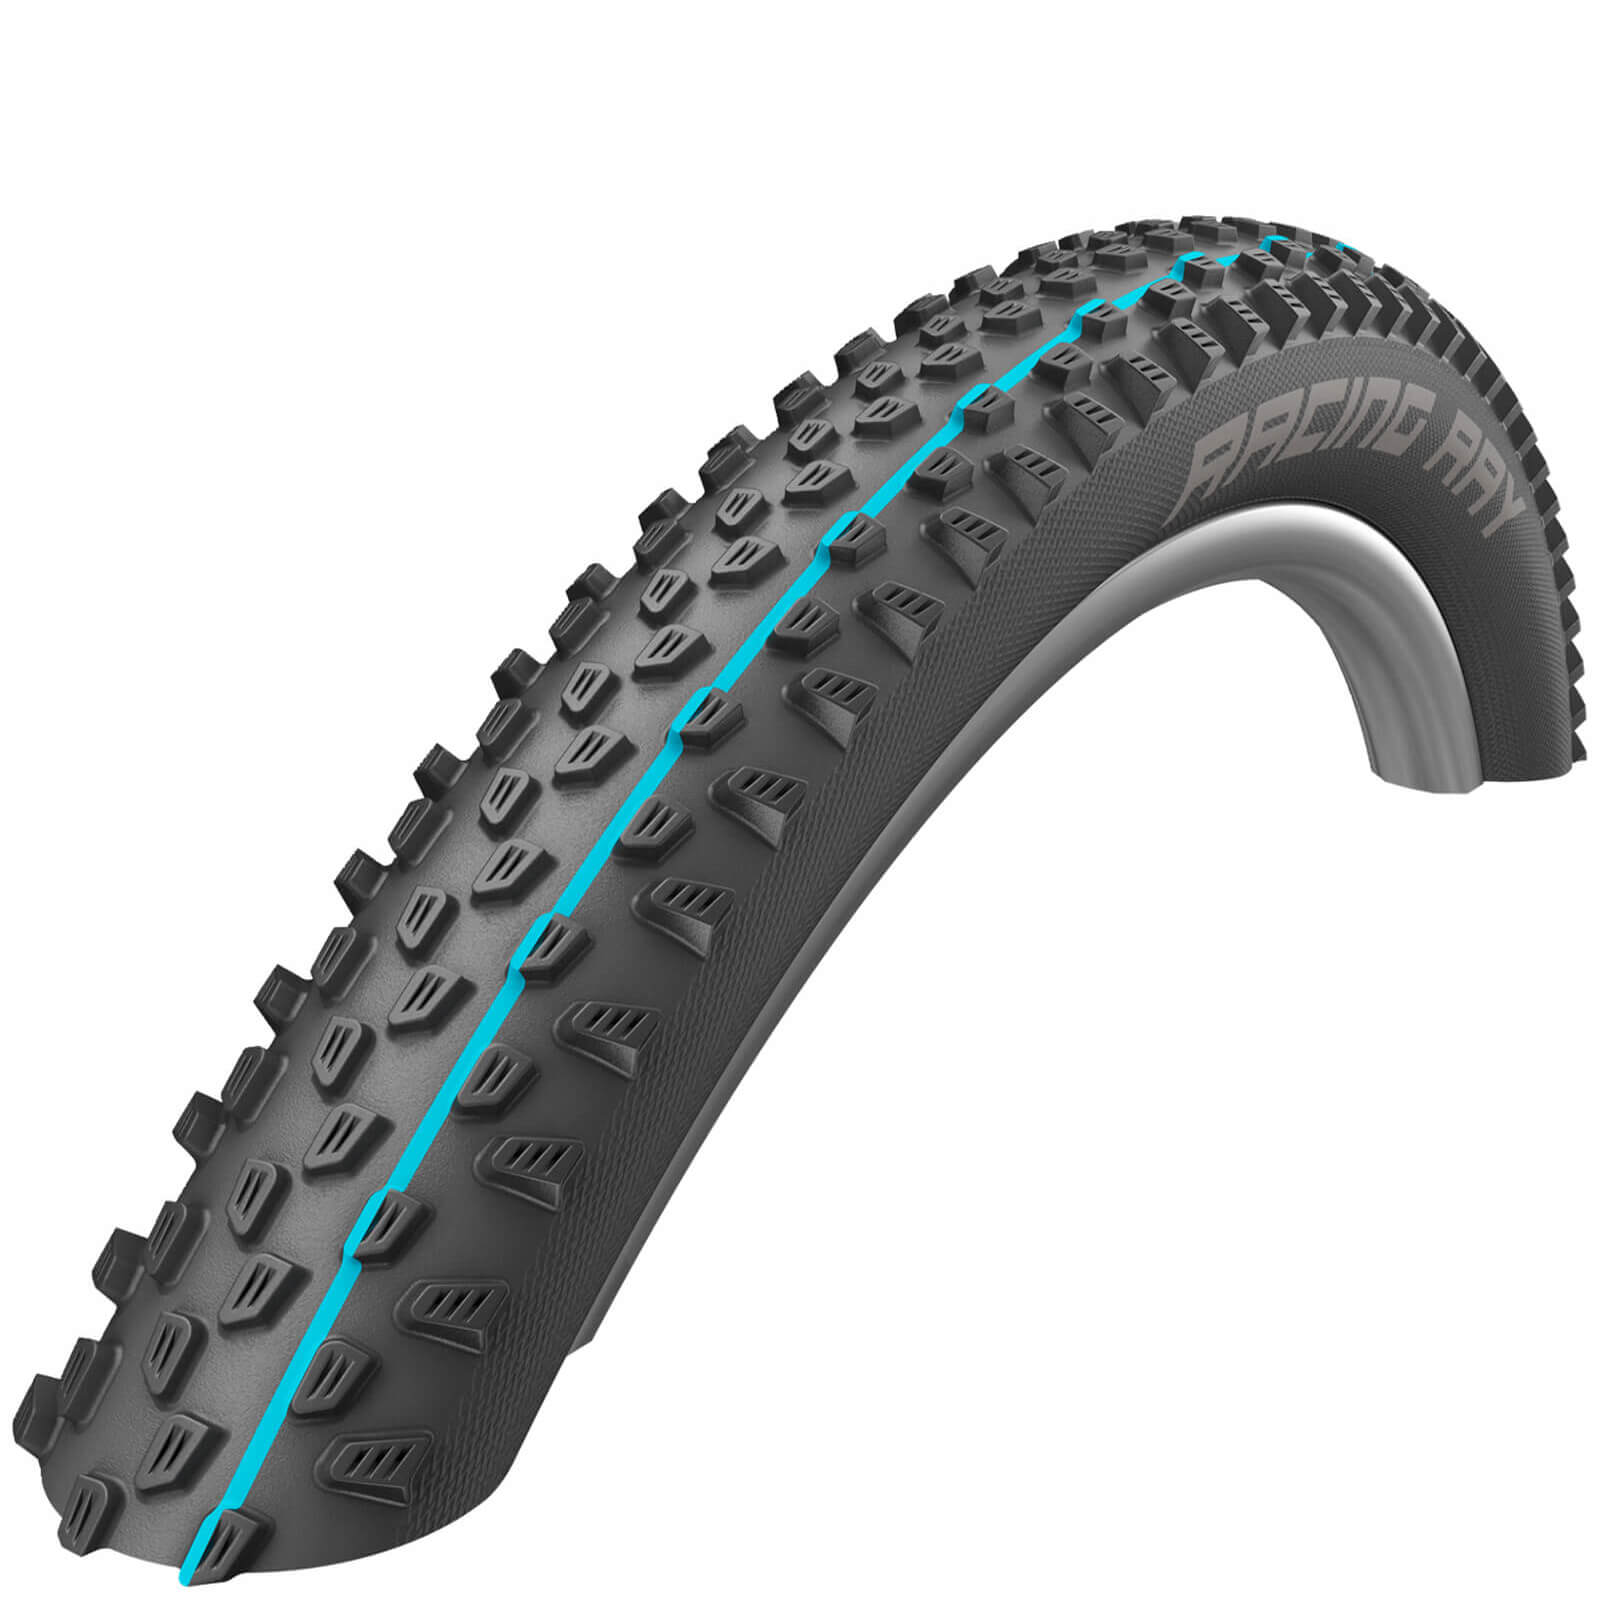 Schwalbe Racing Ray Evo Super Ground Tubeless MTB Tyre - Black - 27.5in x 2.25in